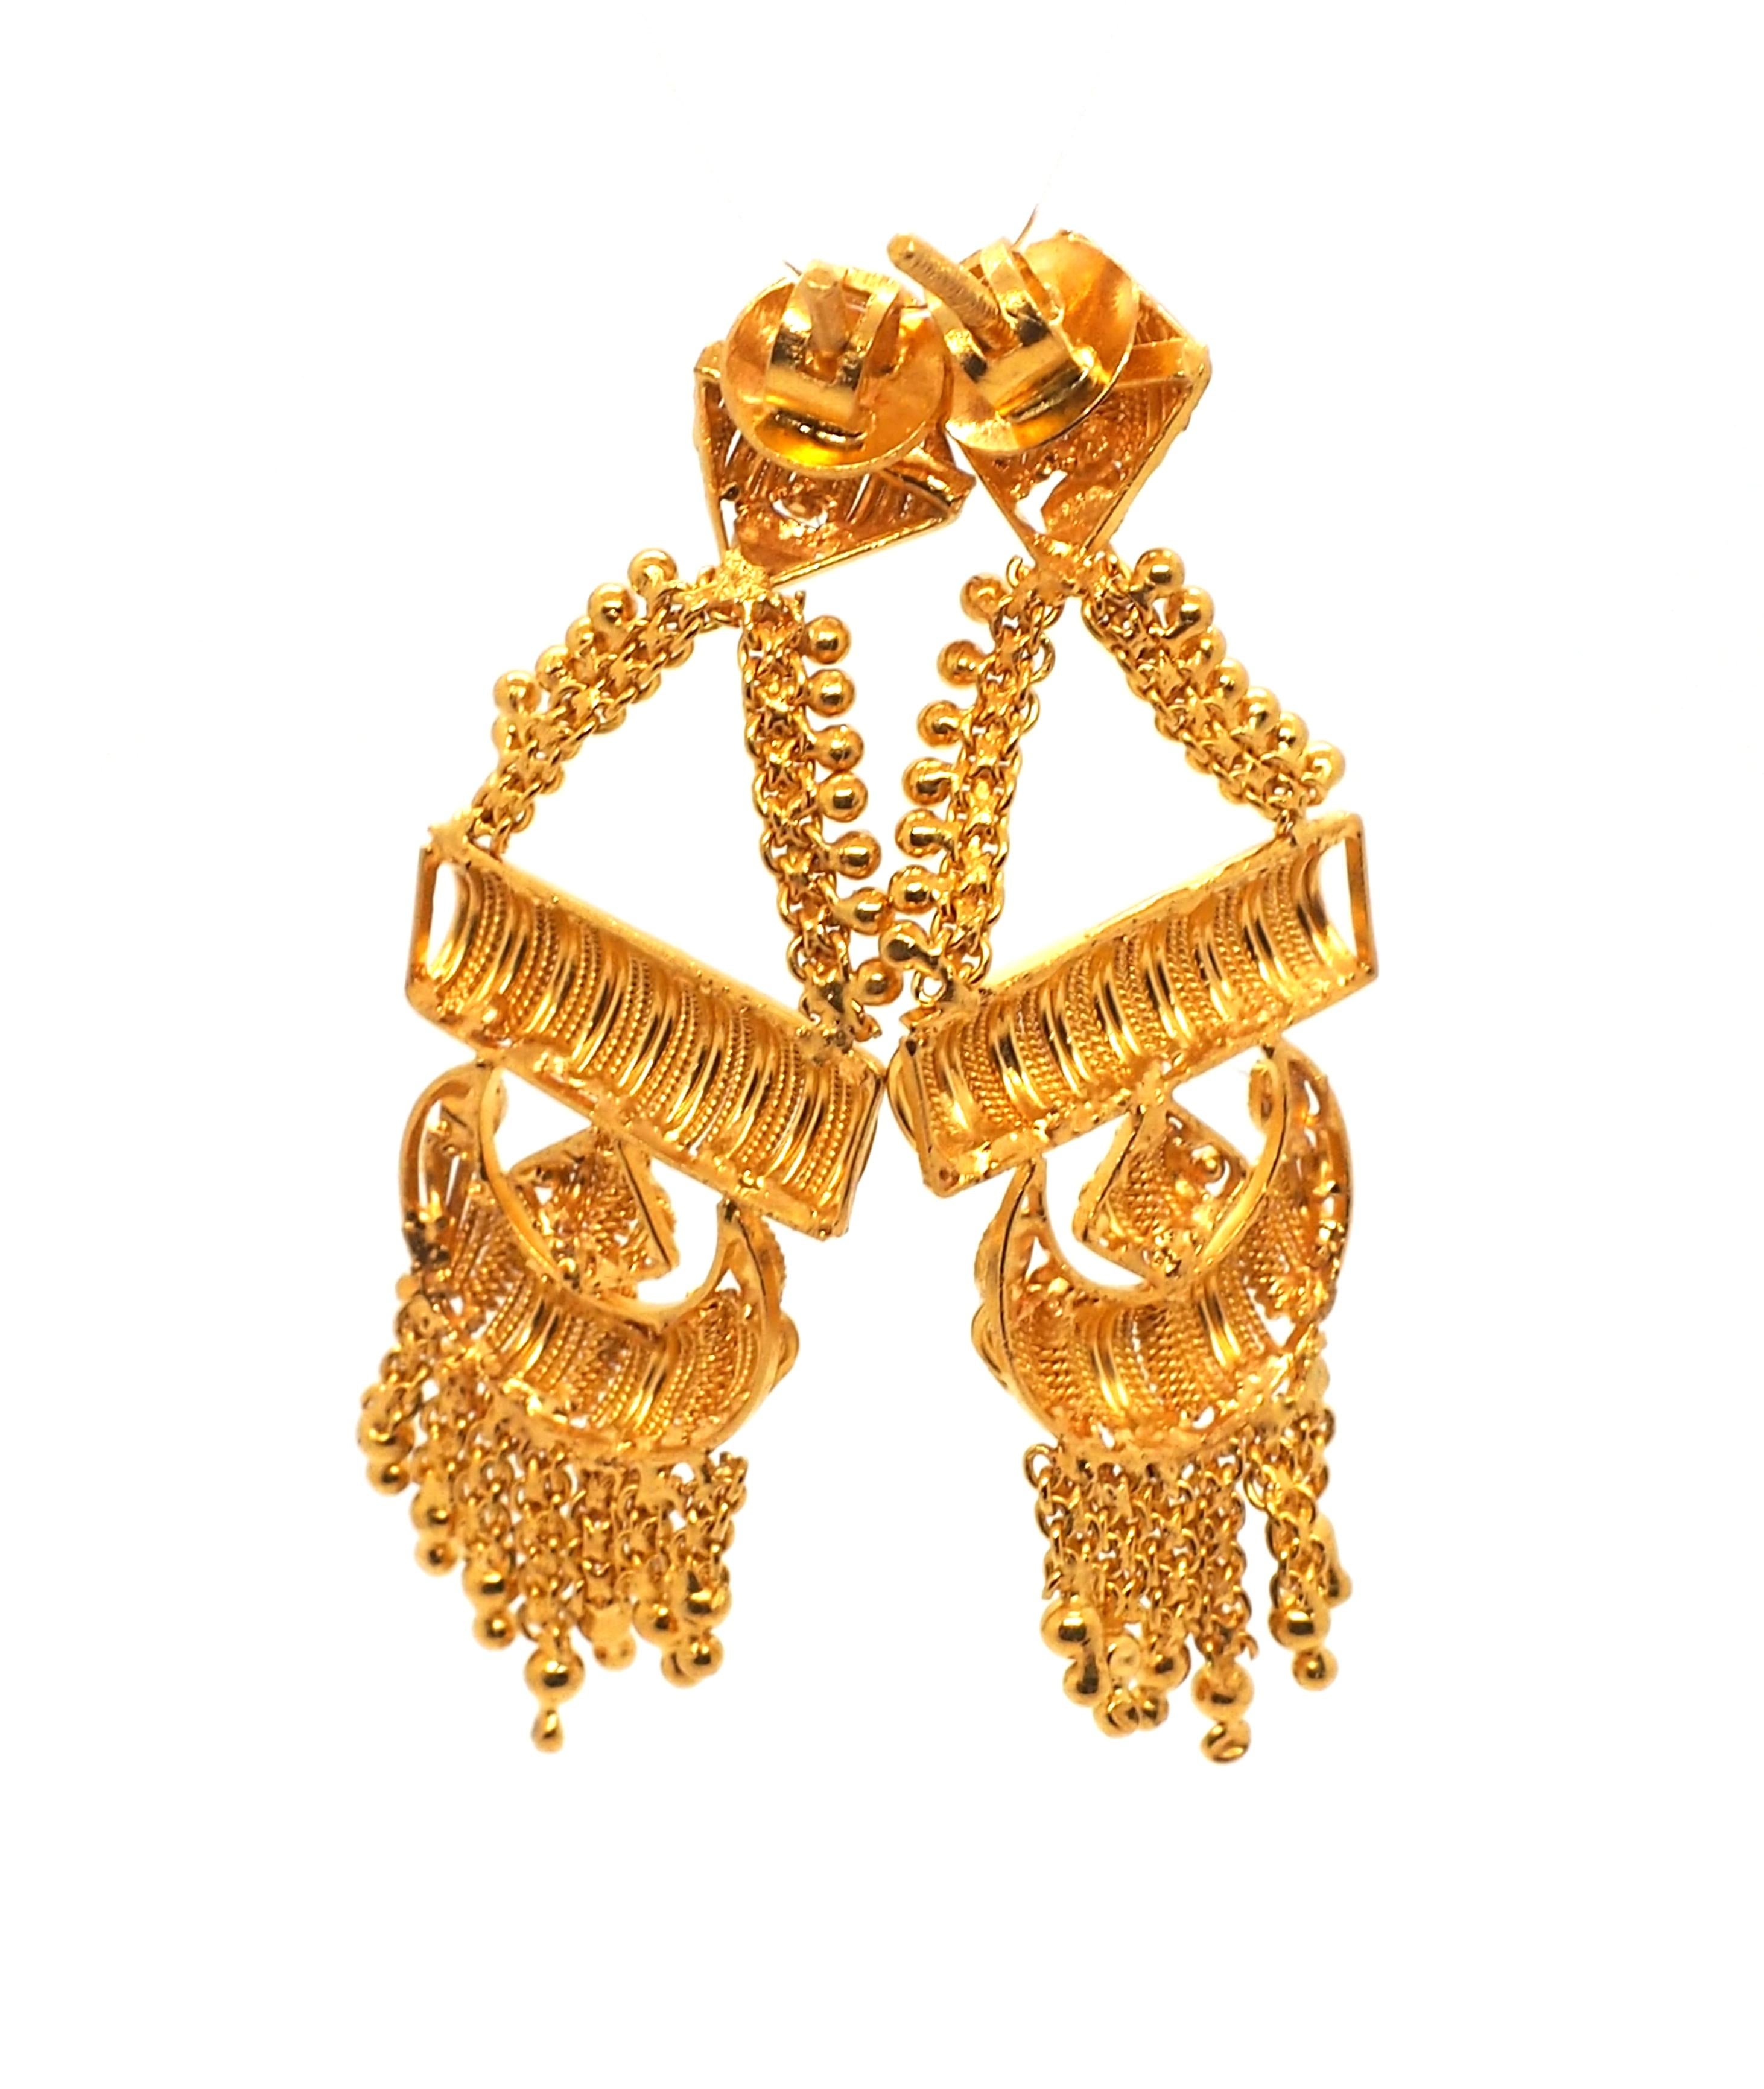 Anglo-Indian Indian Style Chandelier Earrings 21 Karat Gold For Sale